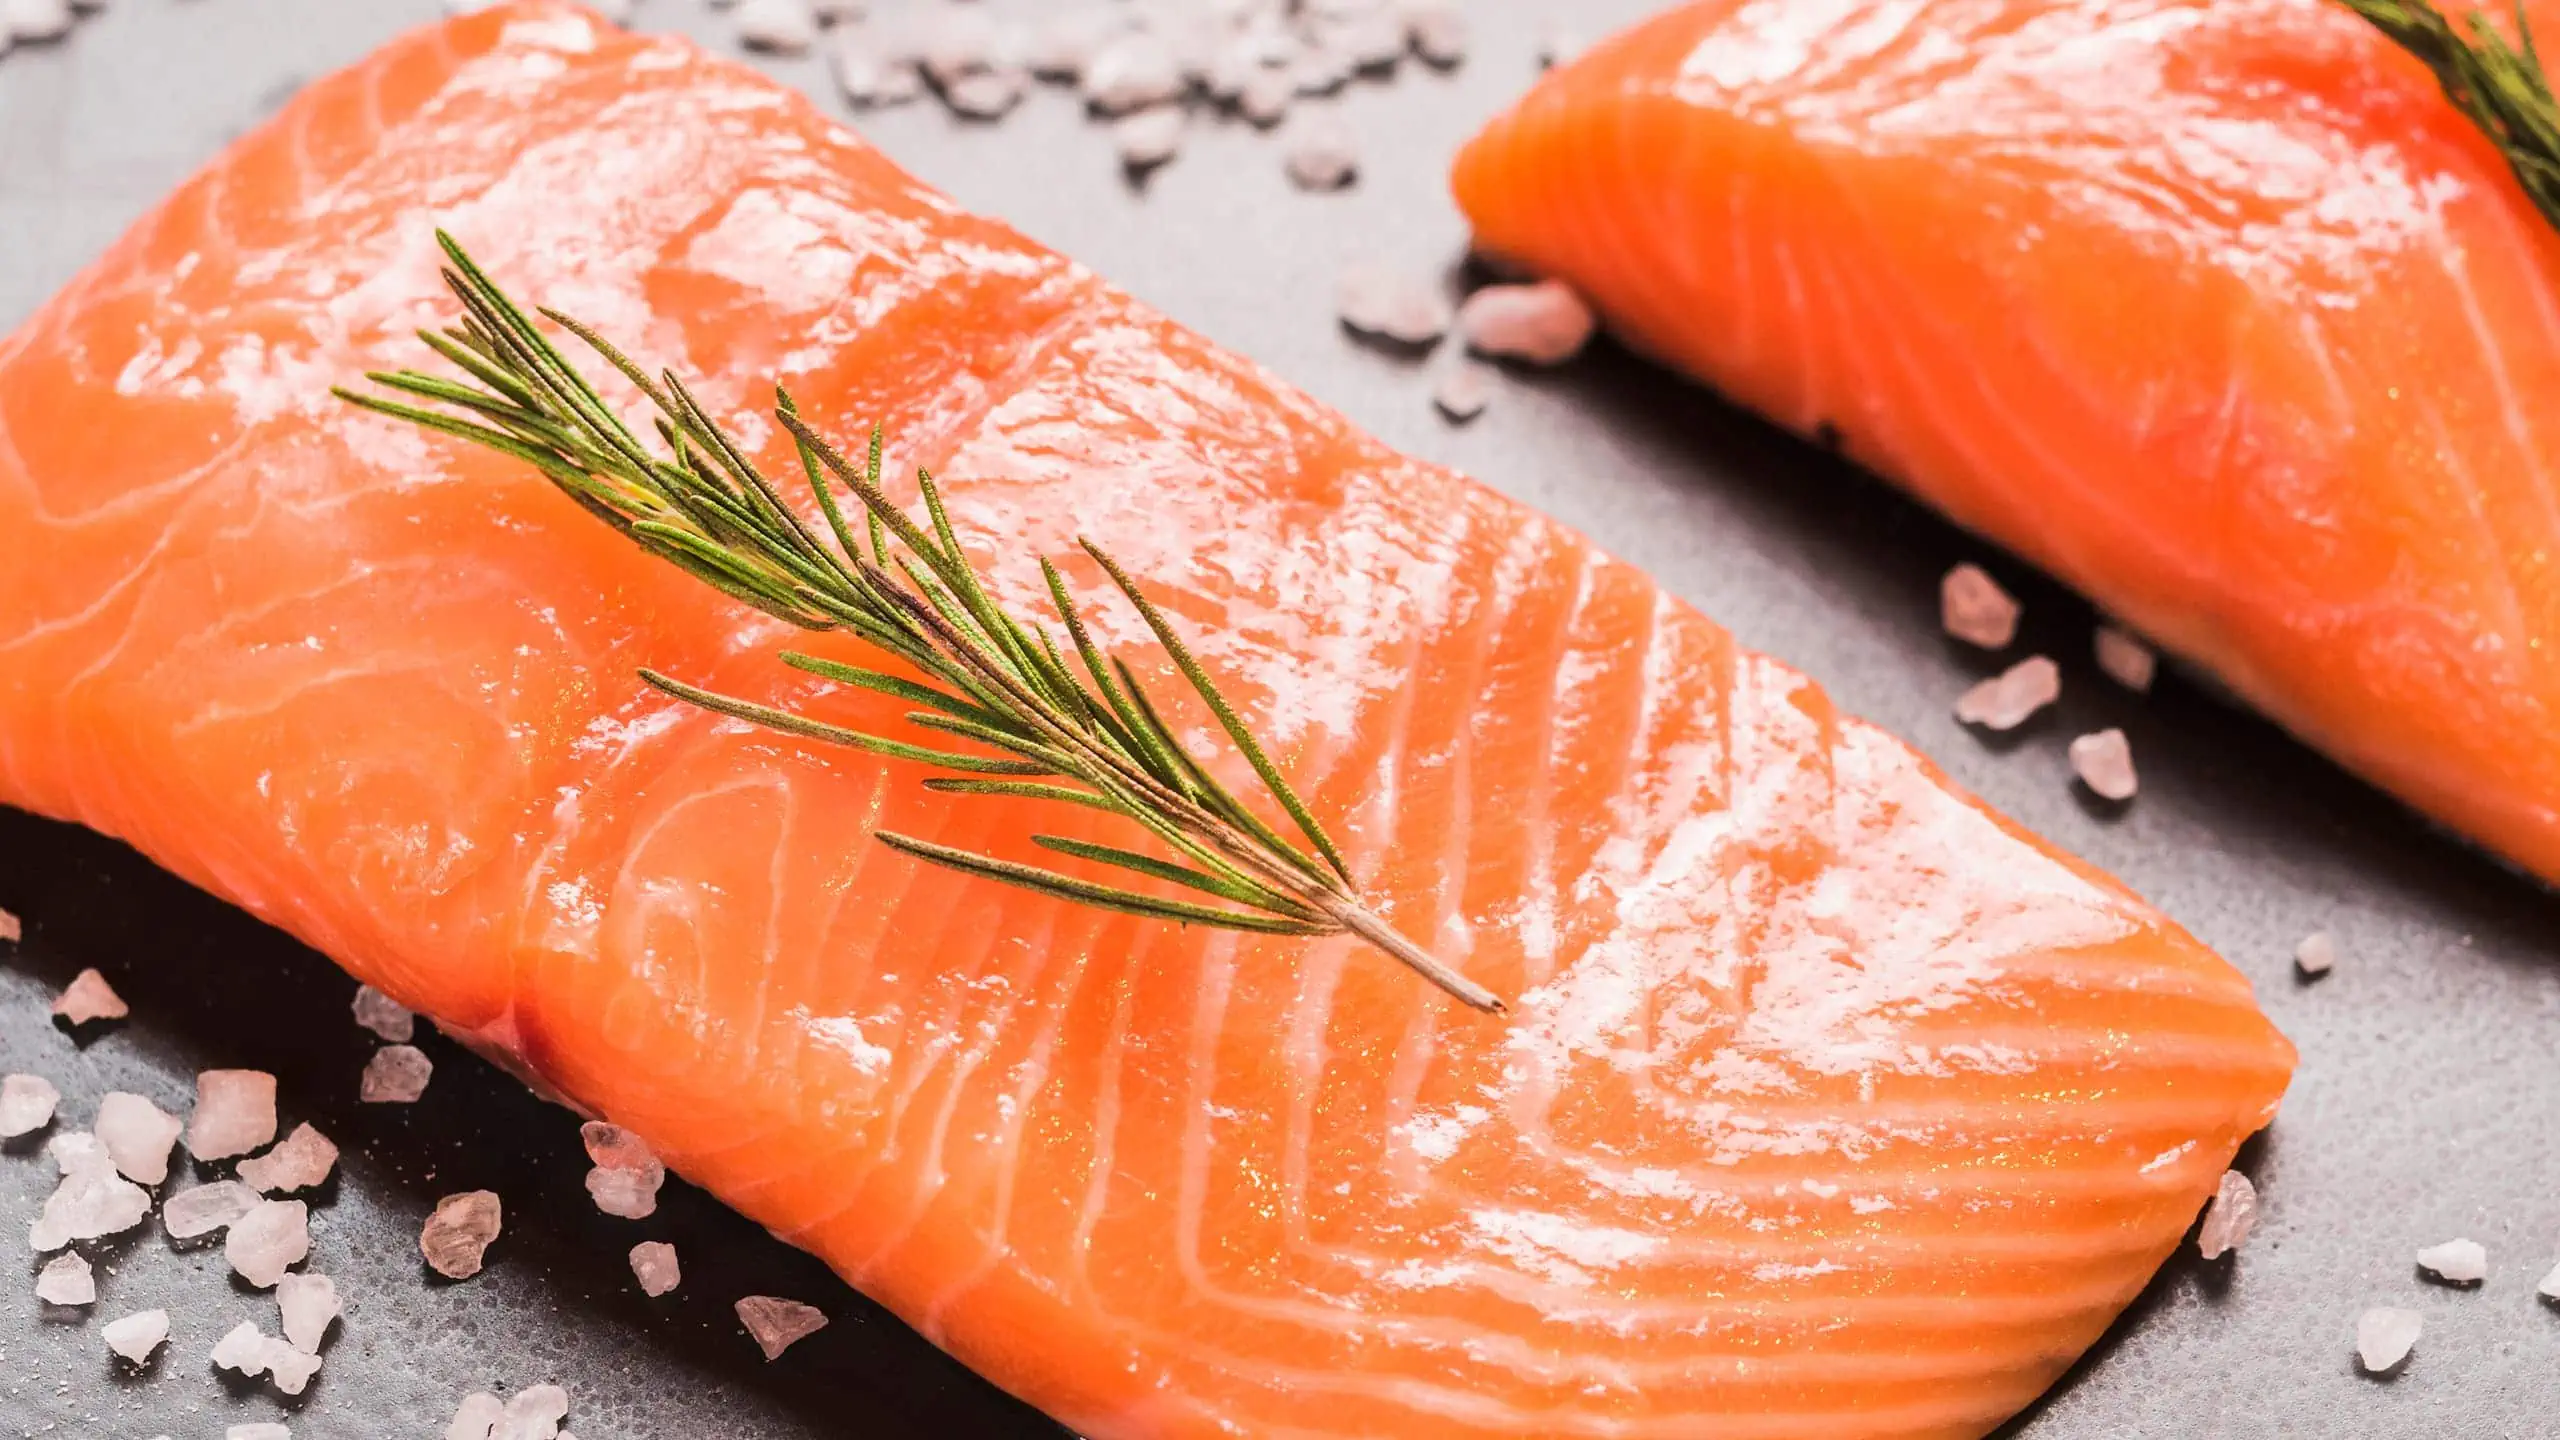 Raw salmon with herbs and salt. Salmon is one our list of foods high in lysine